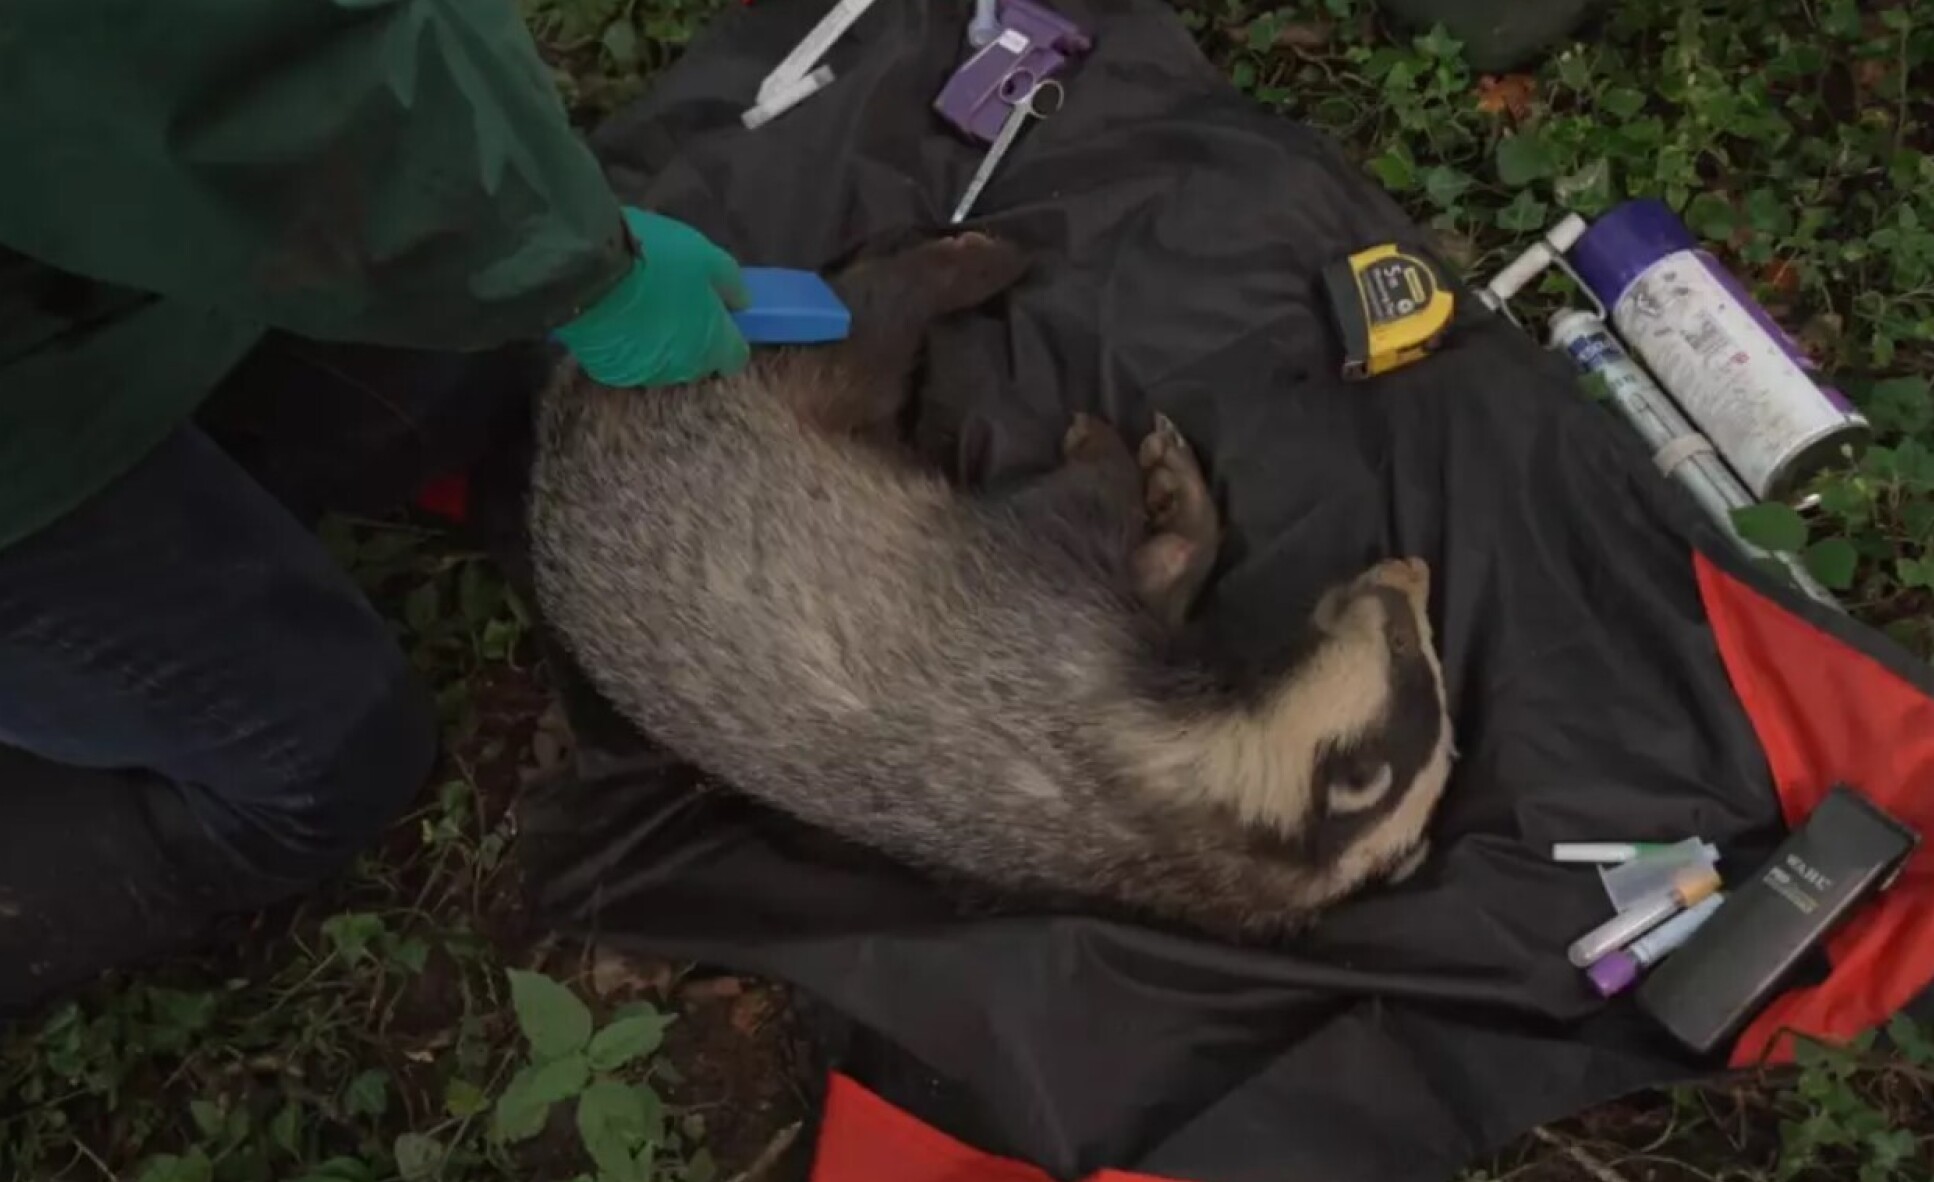 Top view of a badger laid on its side with equipment around